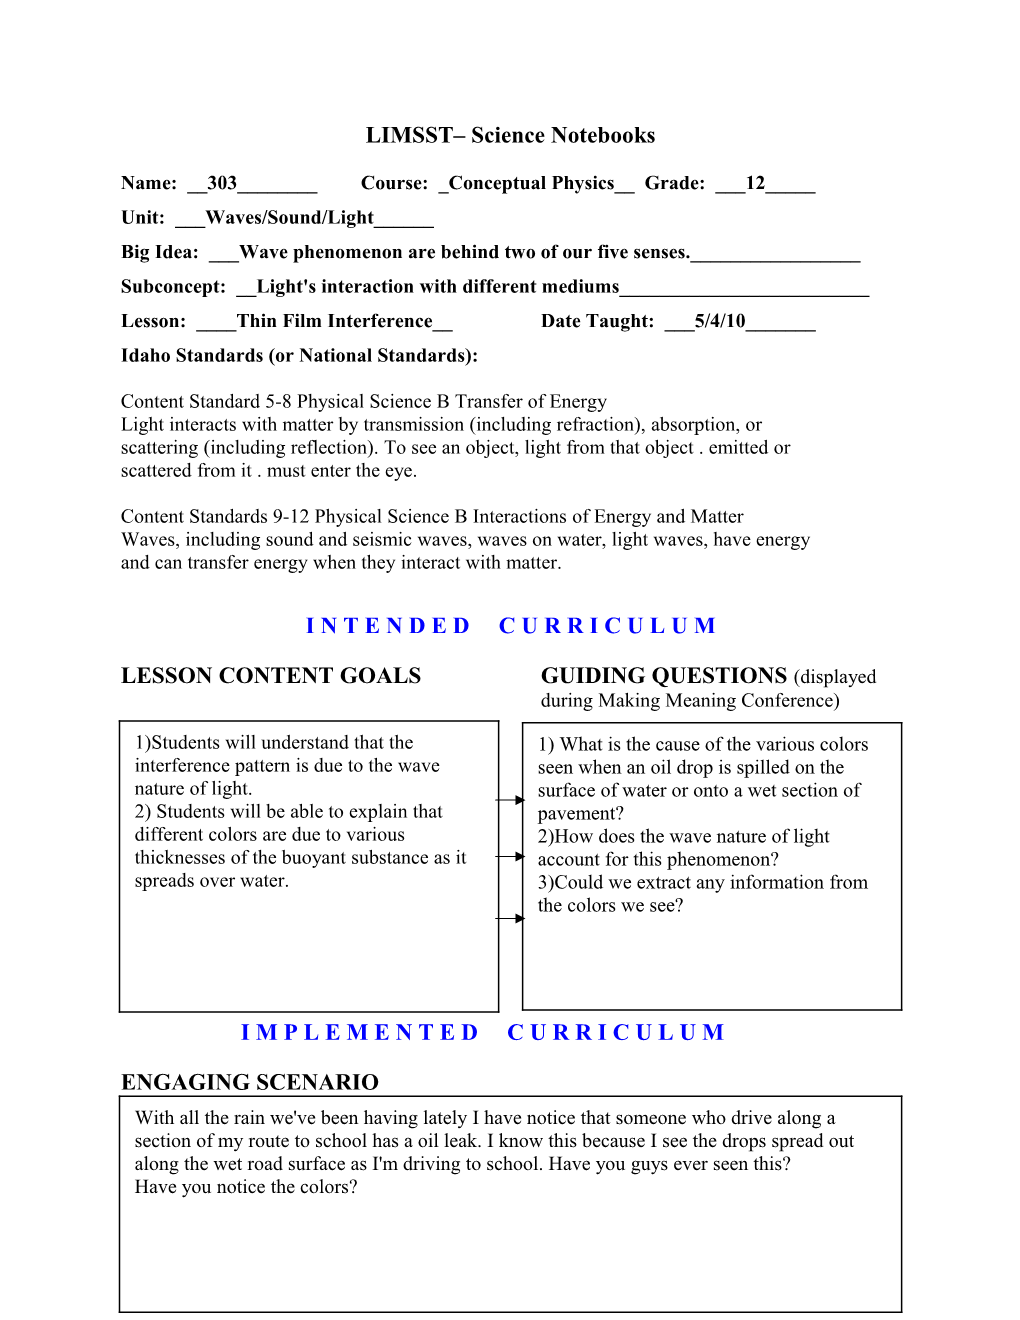 LESSON DESIGN TEMPLATE (May 2004)